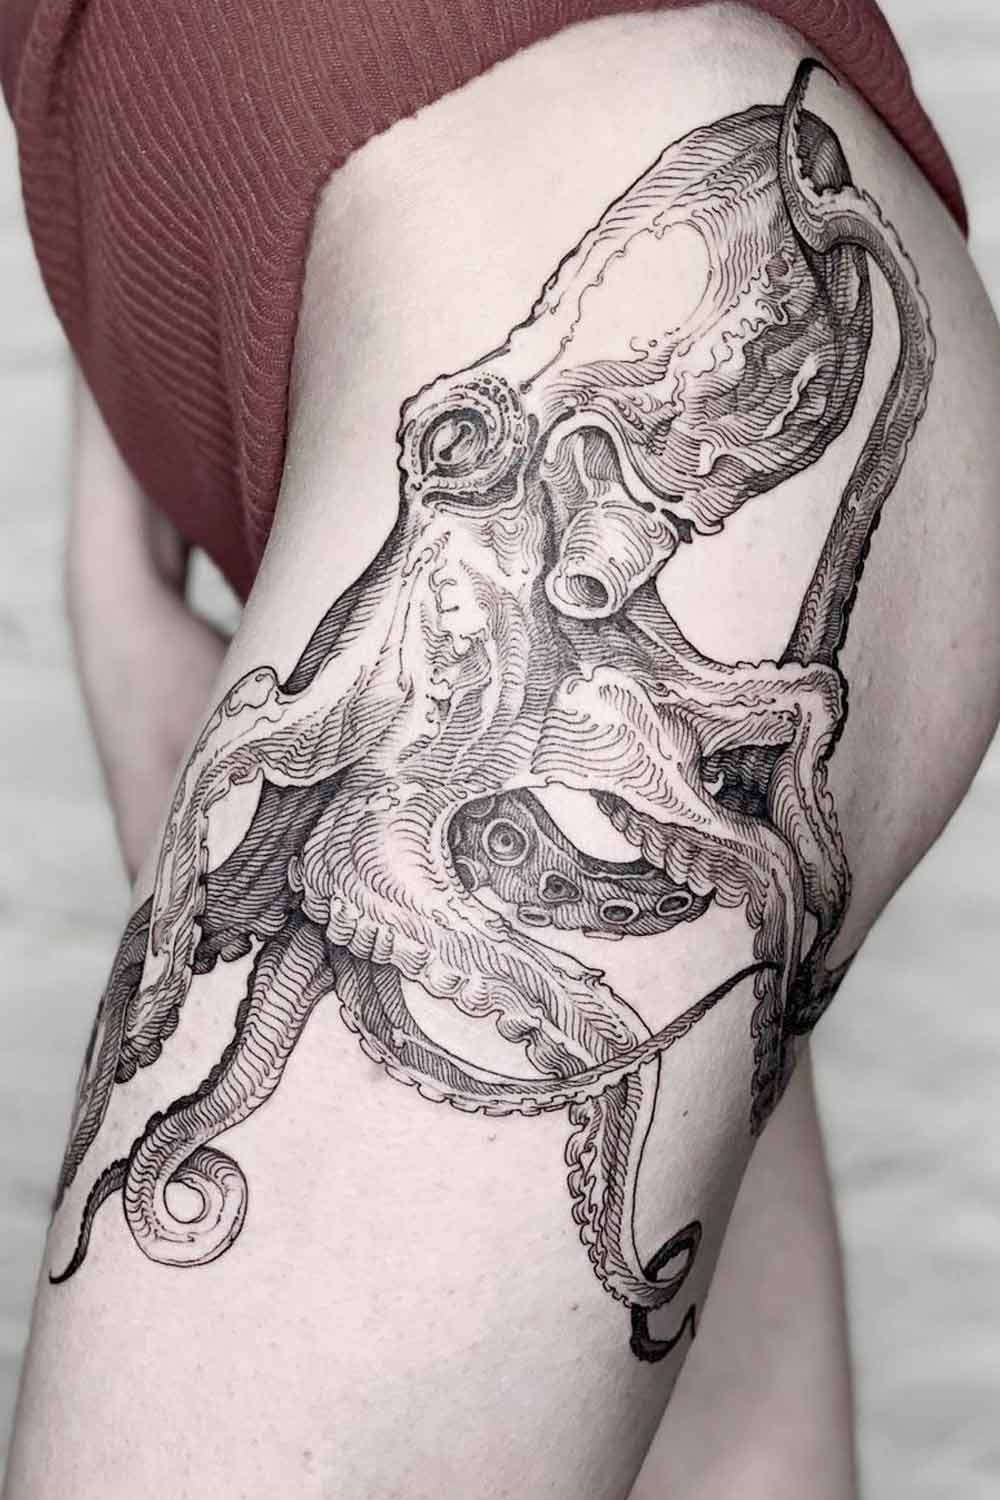 Thigh Black and White Octopus Design Tattoo